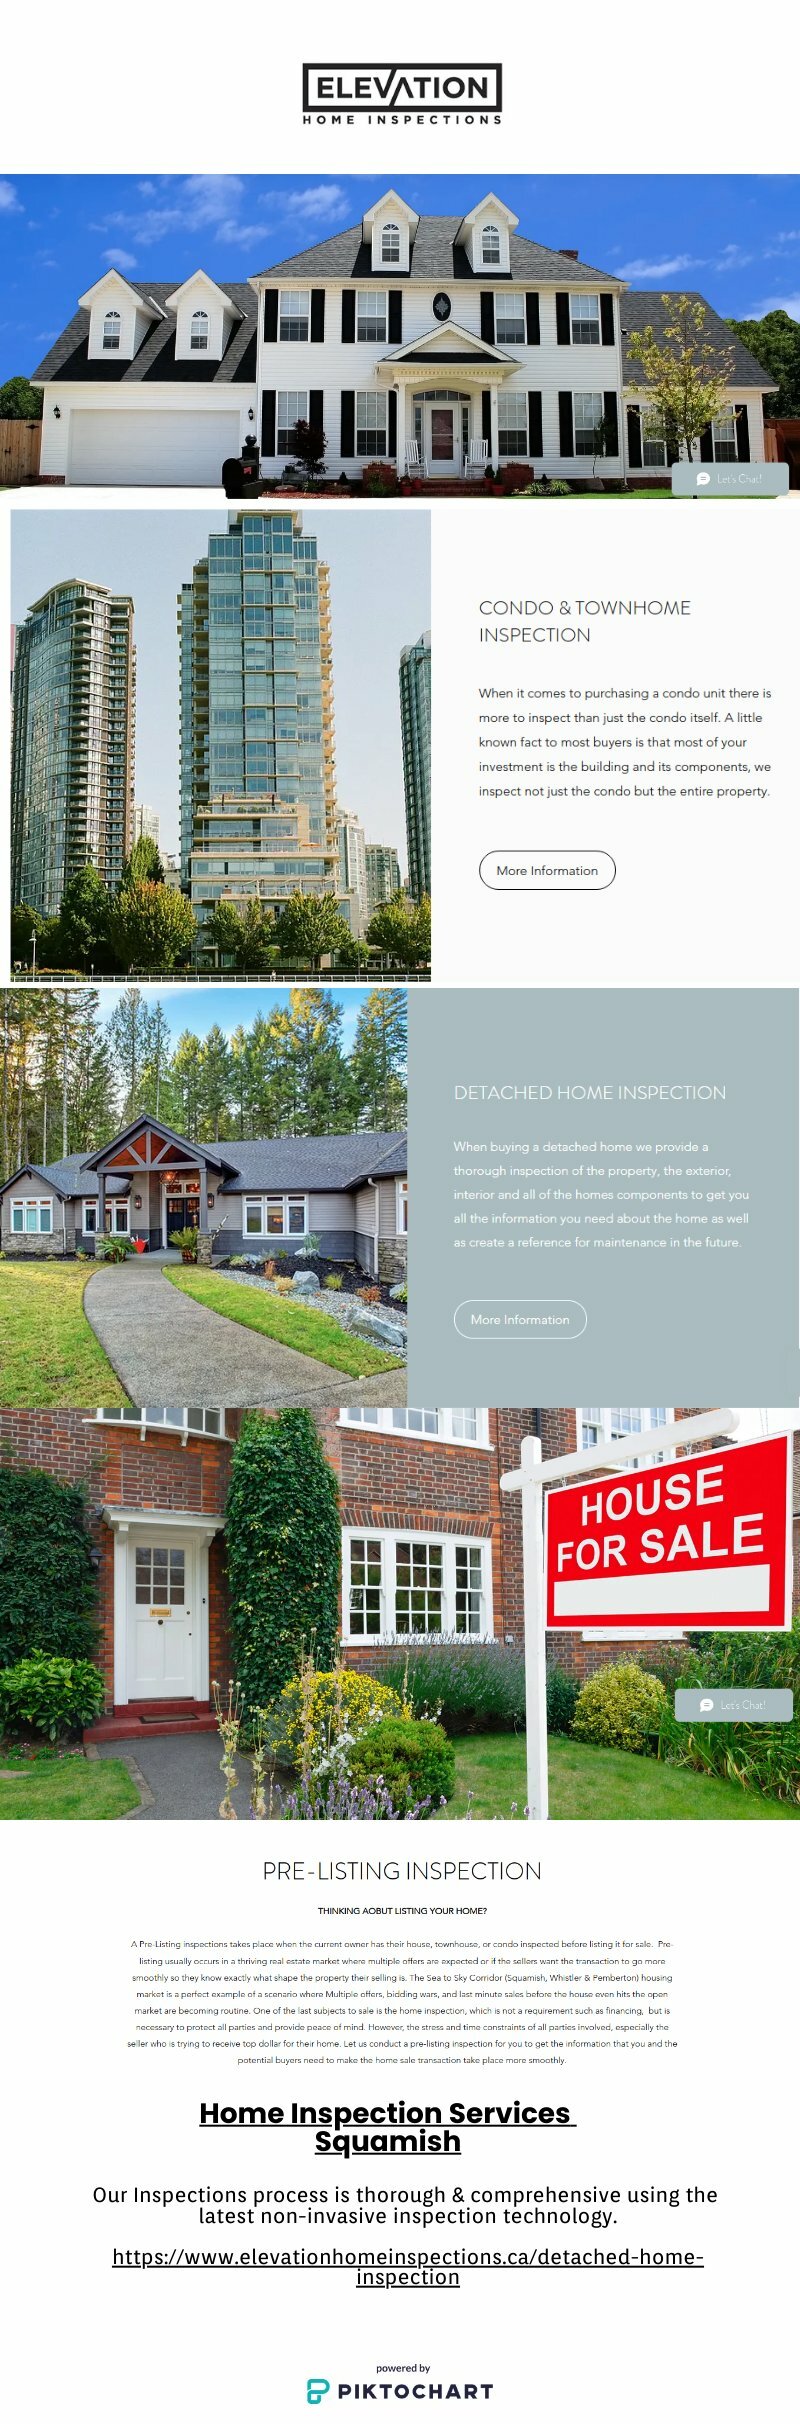 Home Inspection Services Squamish | Piktochart Visual Editor